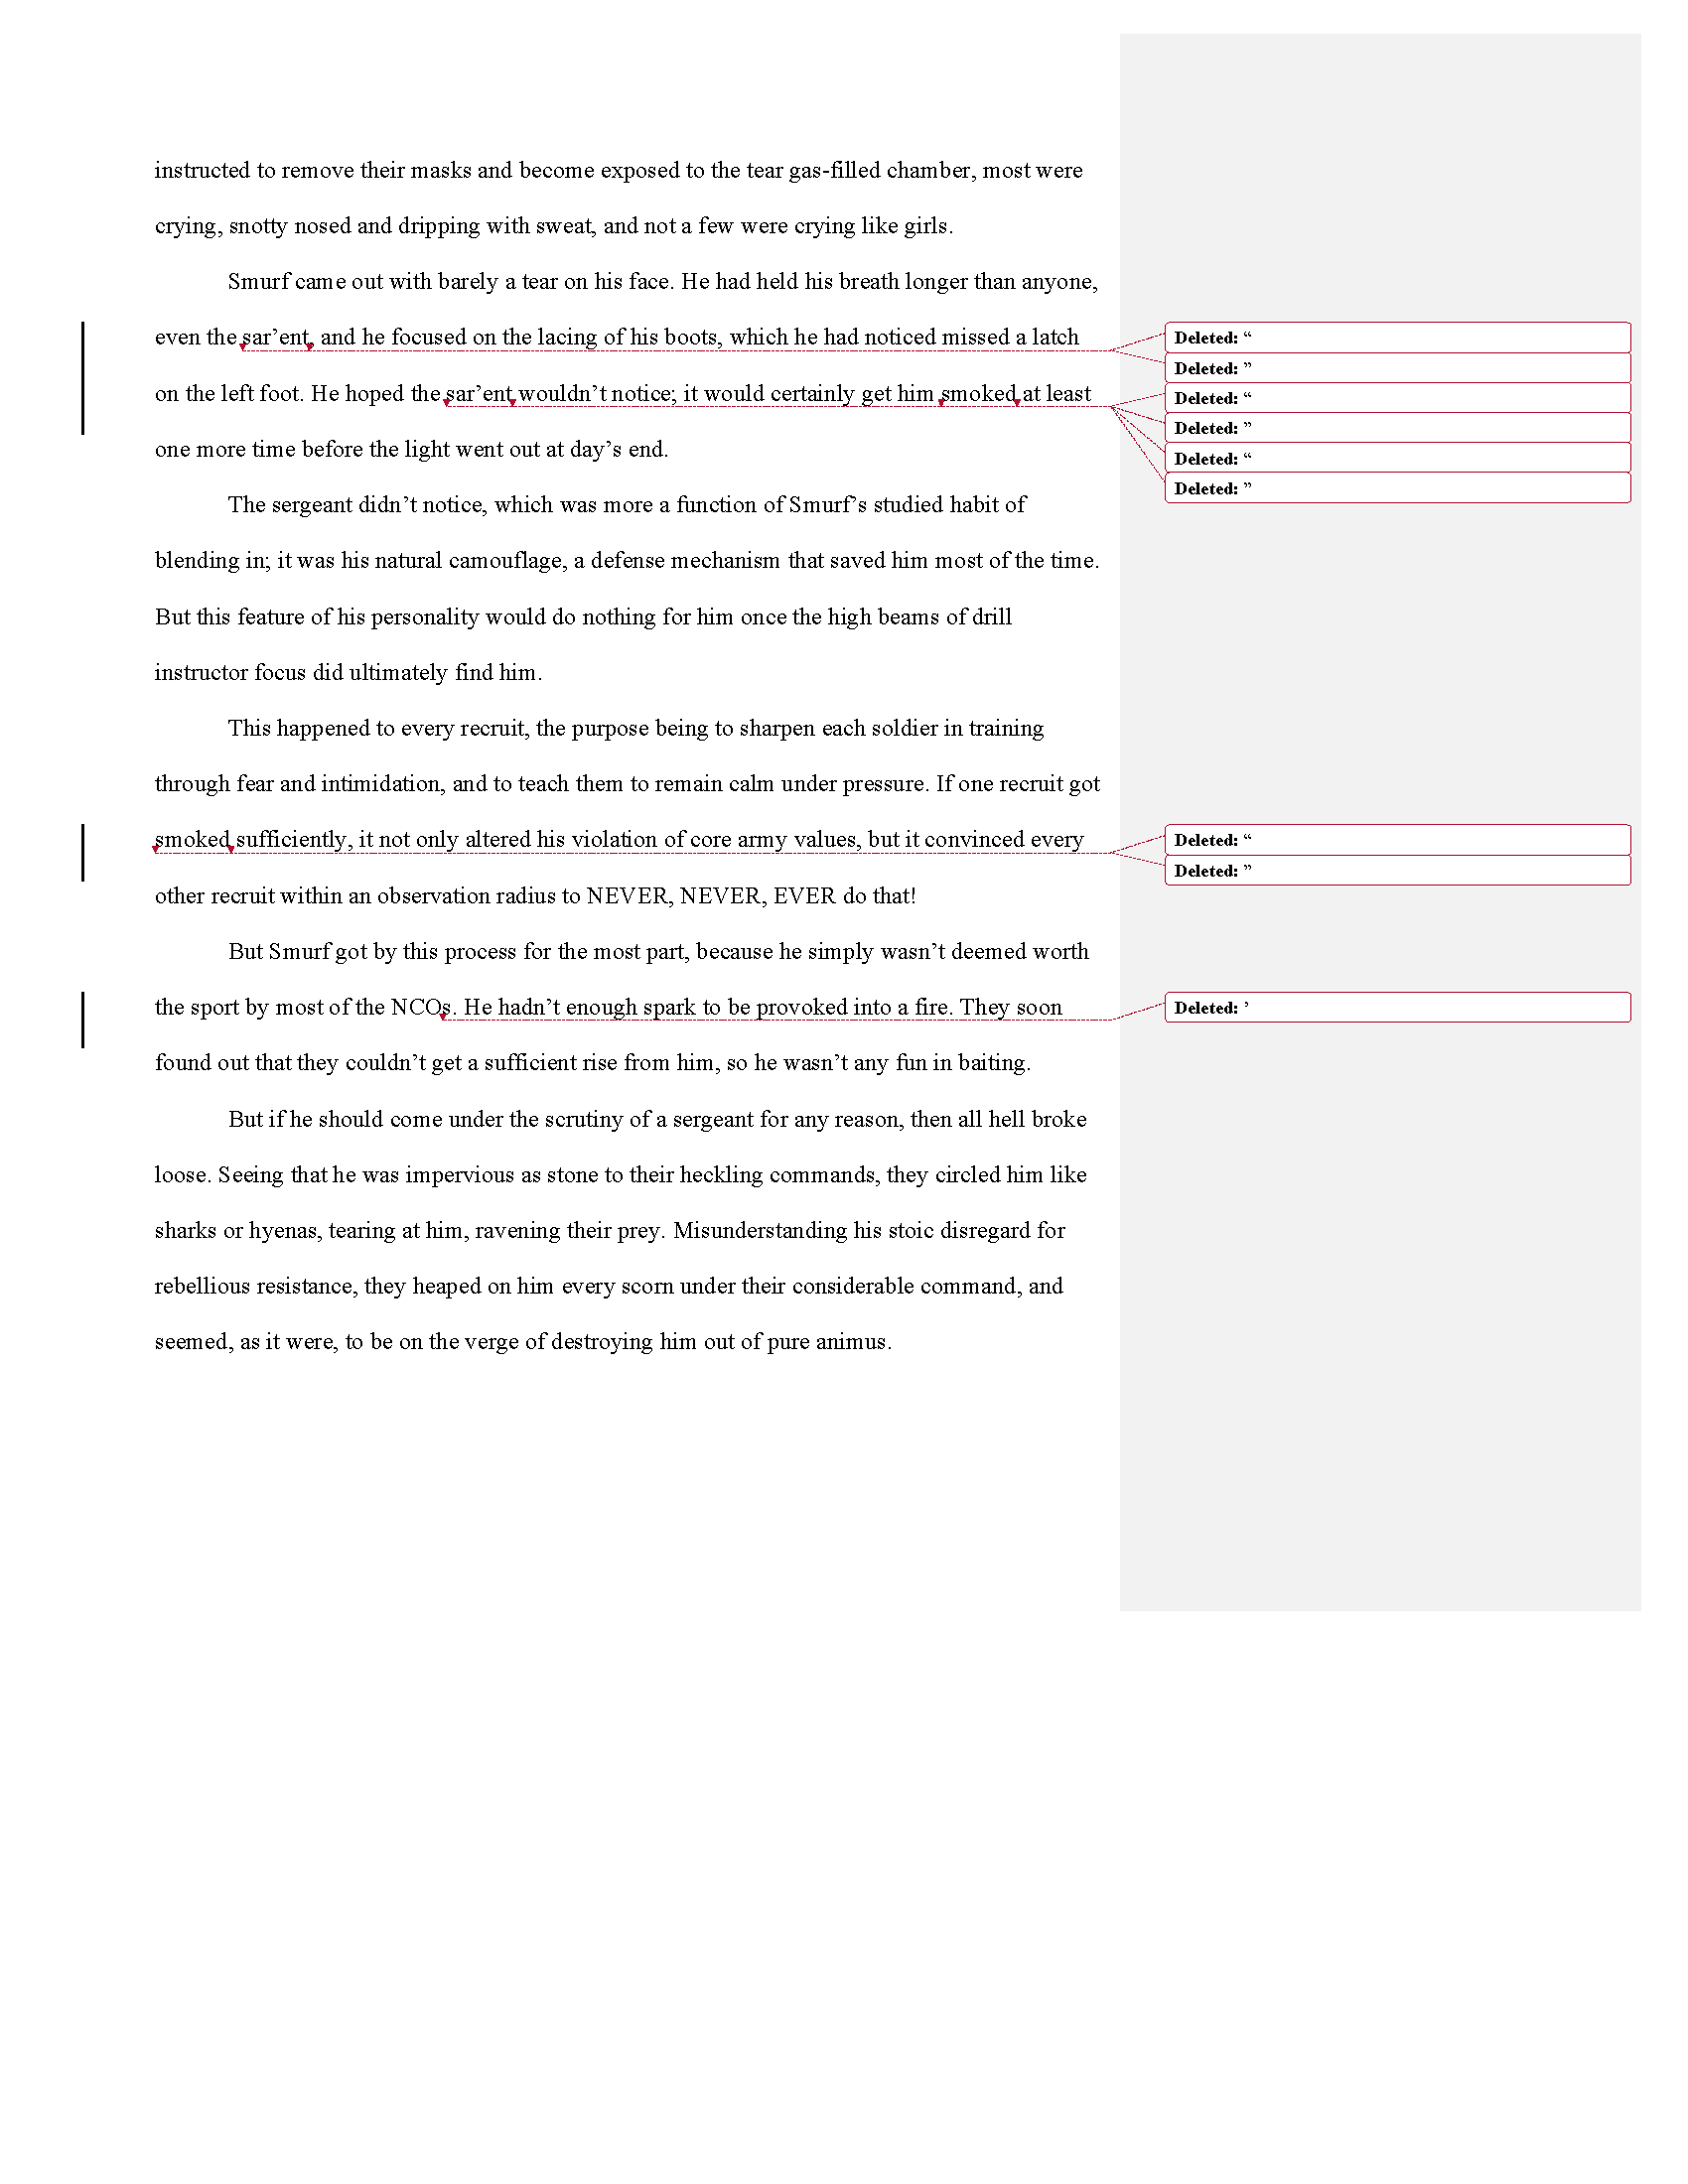 Ep-103-Narrative Identity_Page_06.png